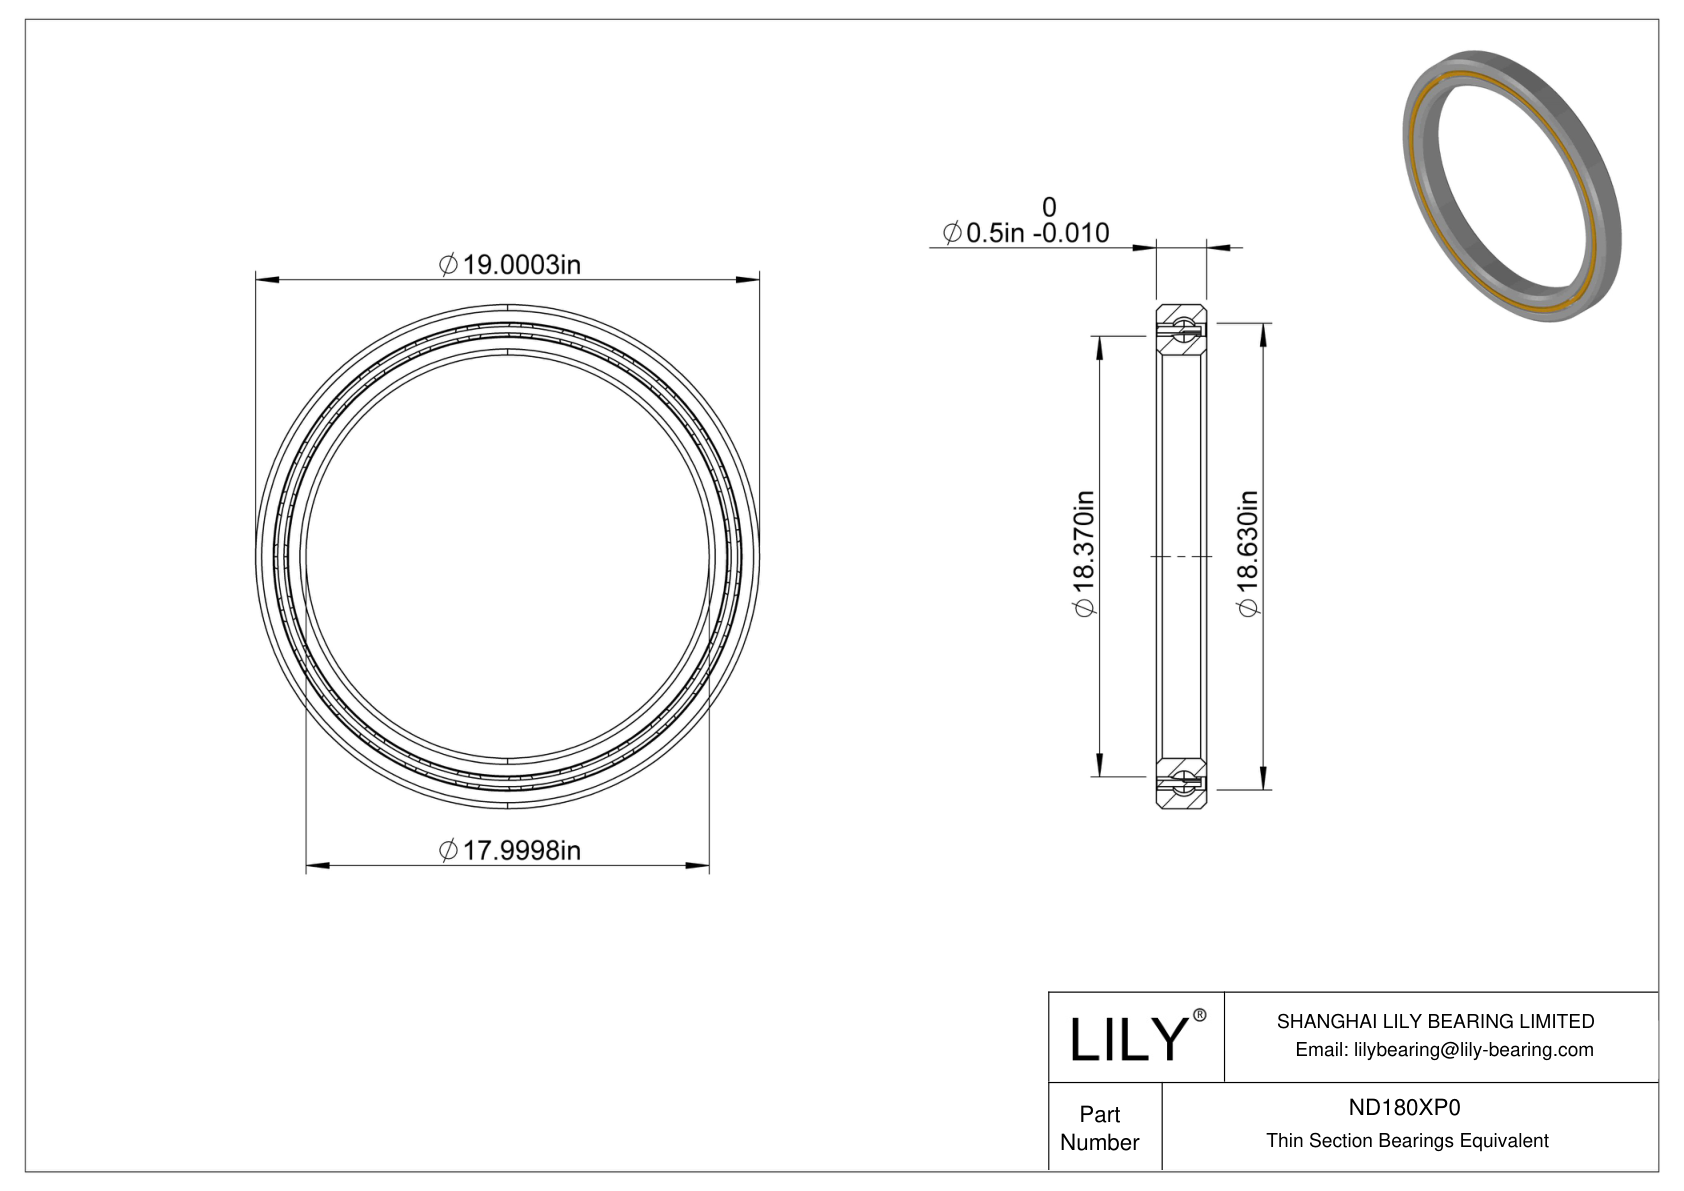 ND180XP0 Constant Section (CS) Bearings cad drawing